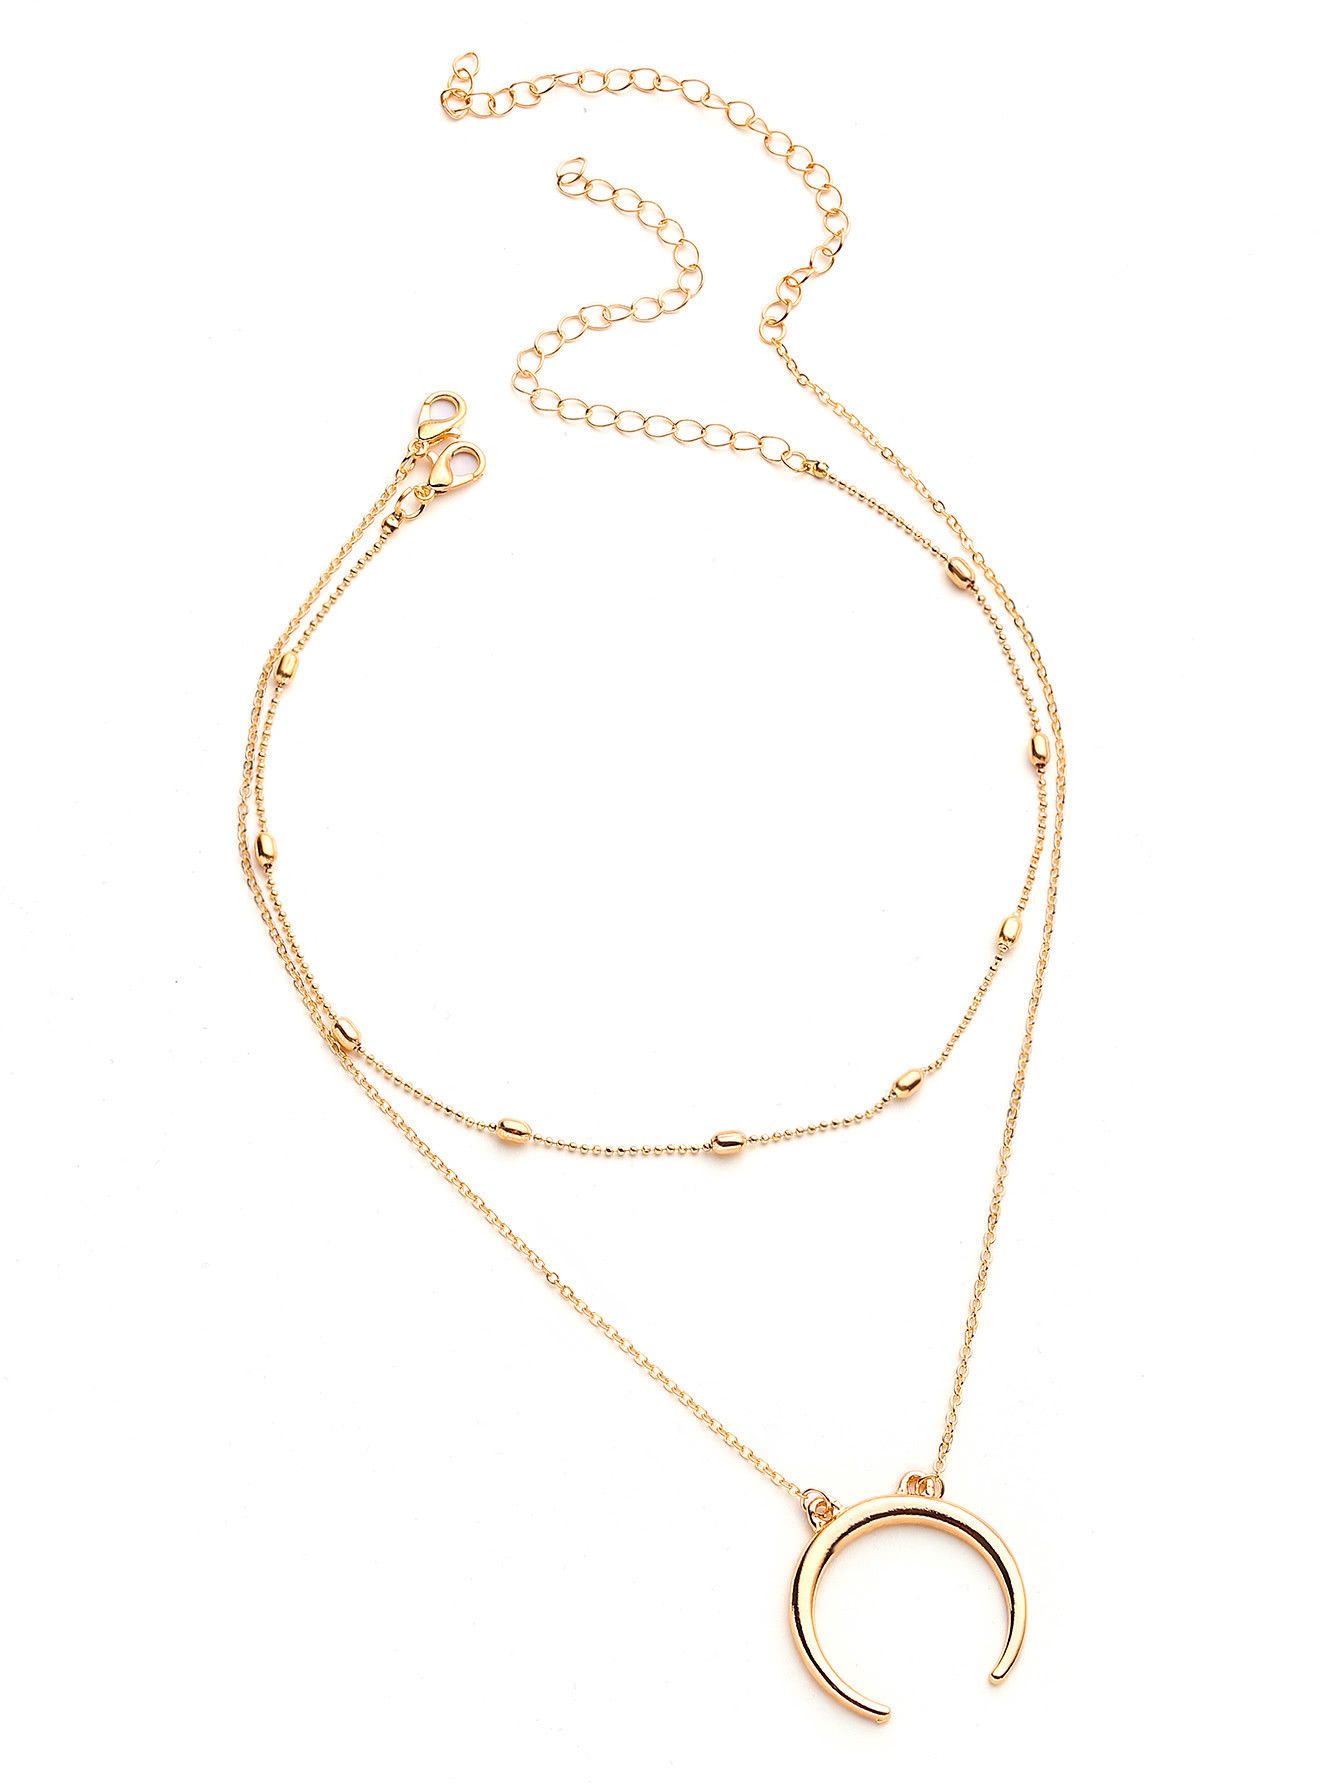 Metal Moon Pendant Necklace With Chain Choker | SHEIN